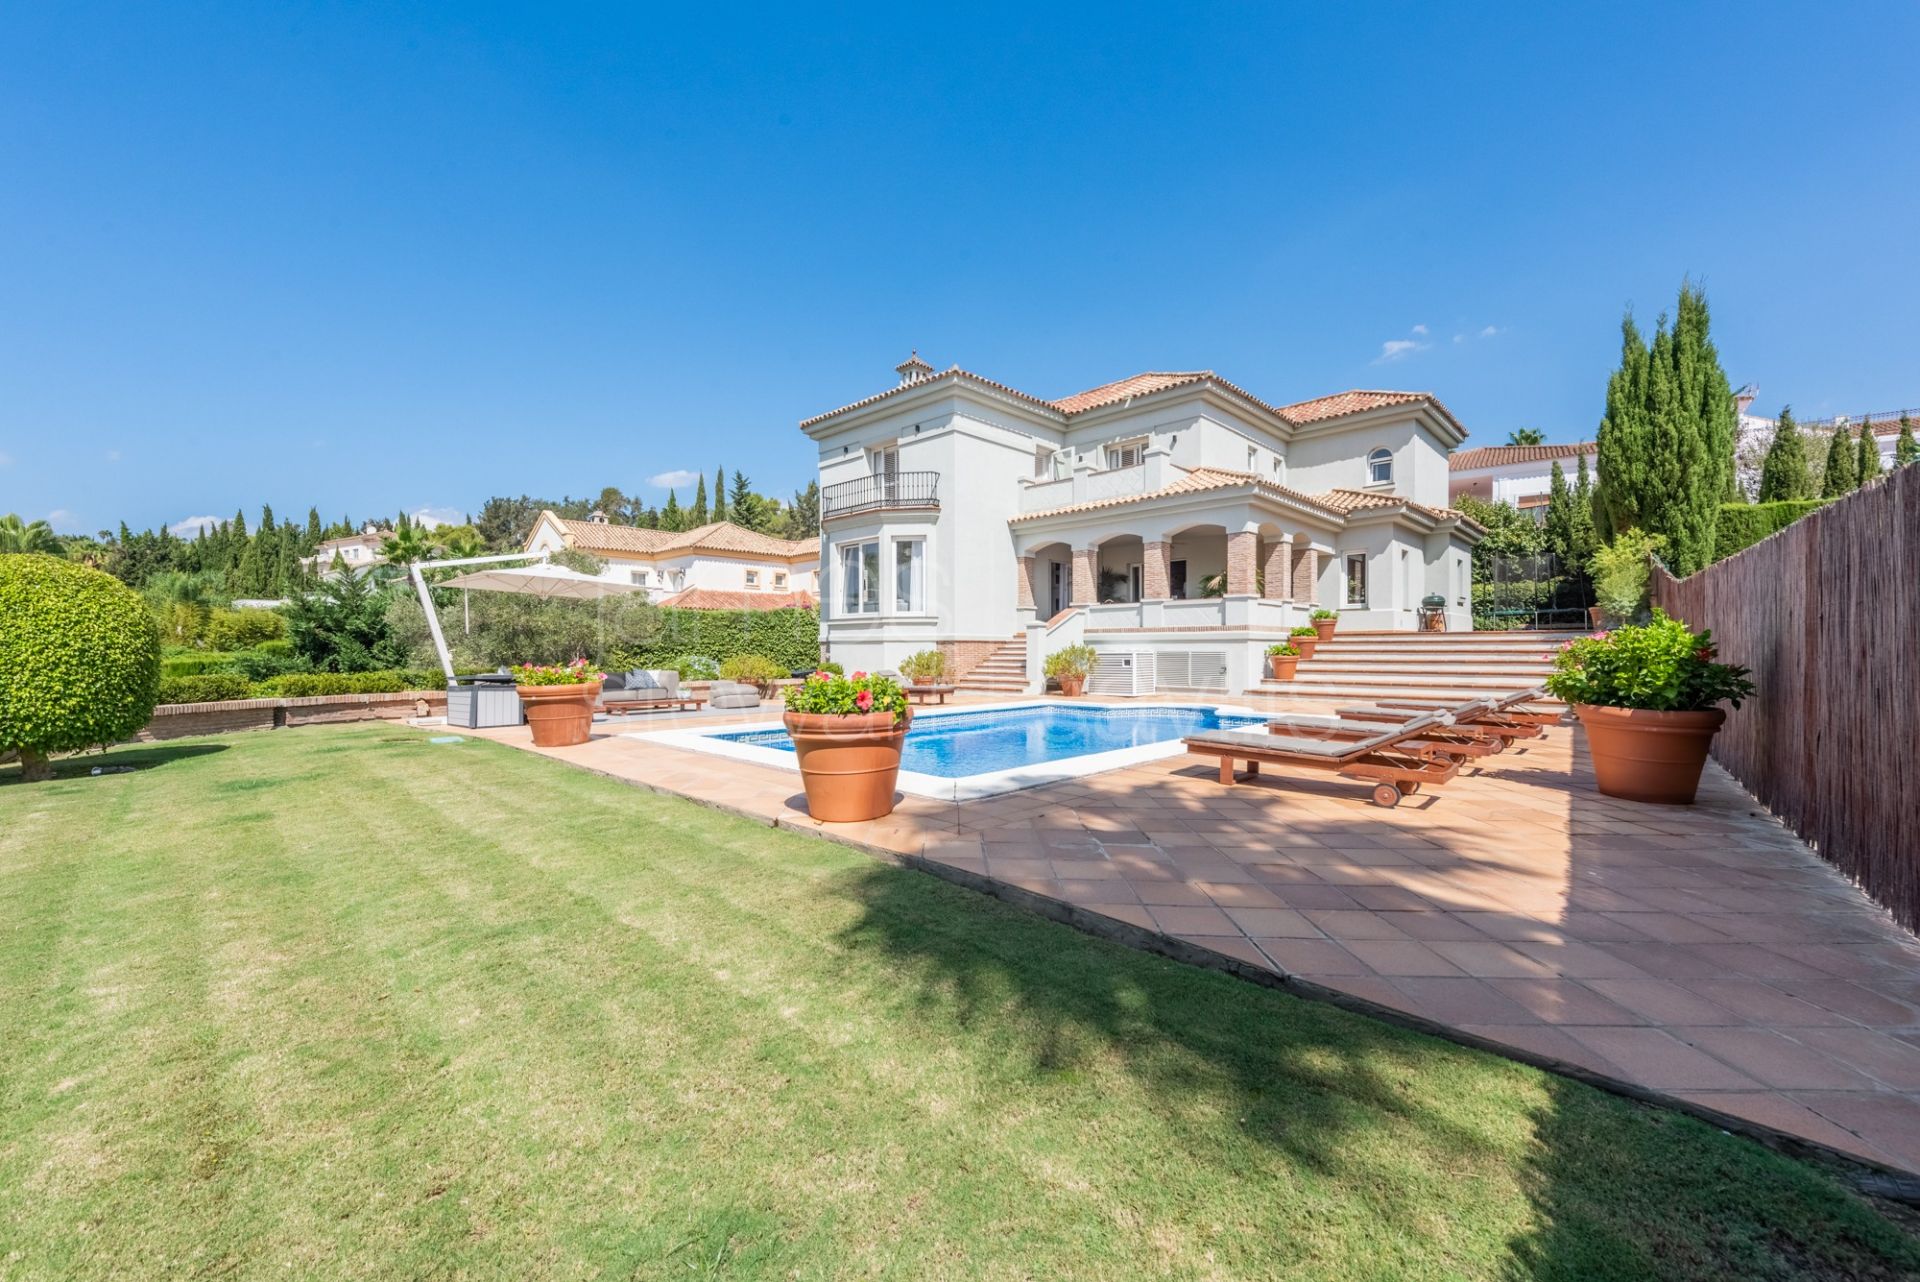 Excellent family home on a quiet cul-de-sac with panoramic golf views